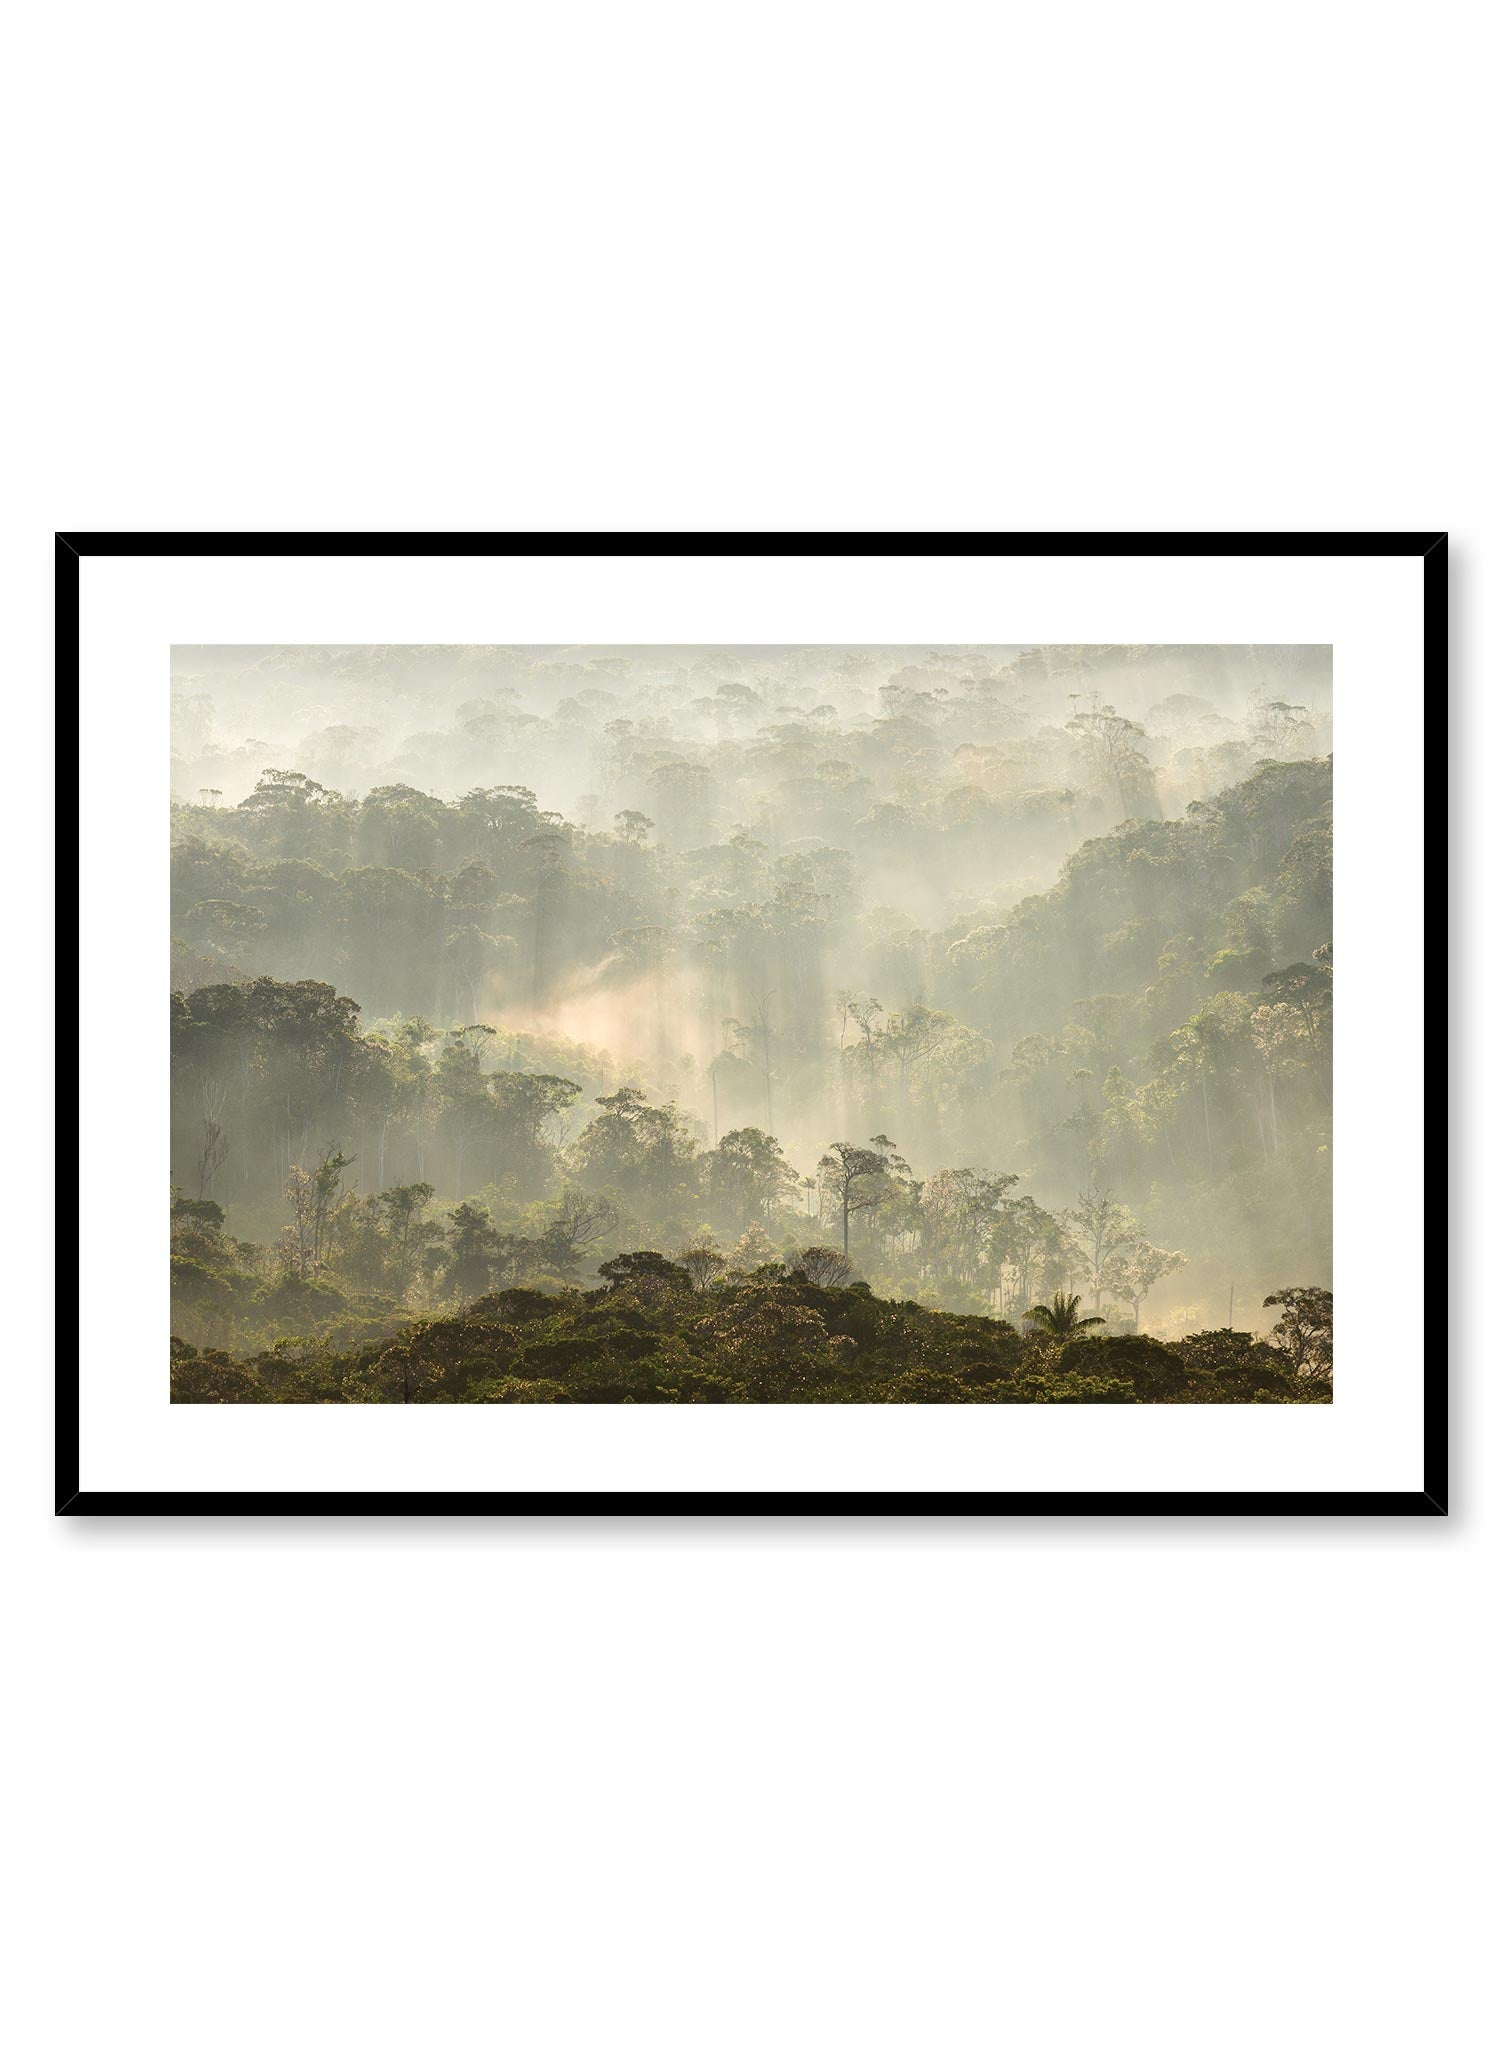 Petrichor is a minimalist photography of the grandiose view on a misty rainforest with tiny beams of sunlight shining through by Opposite Wall.